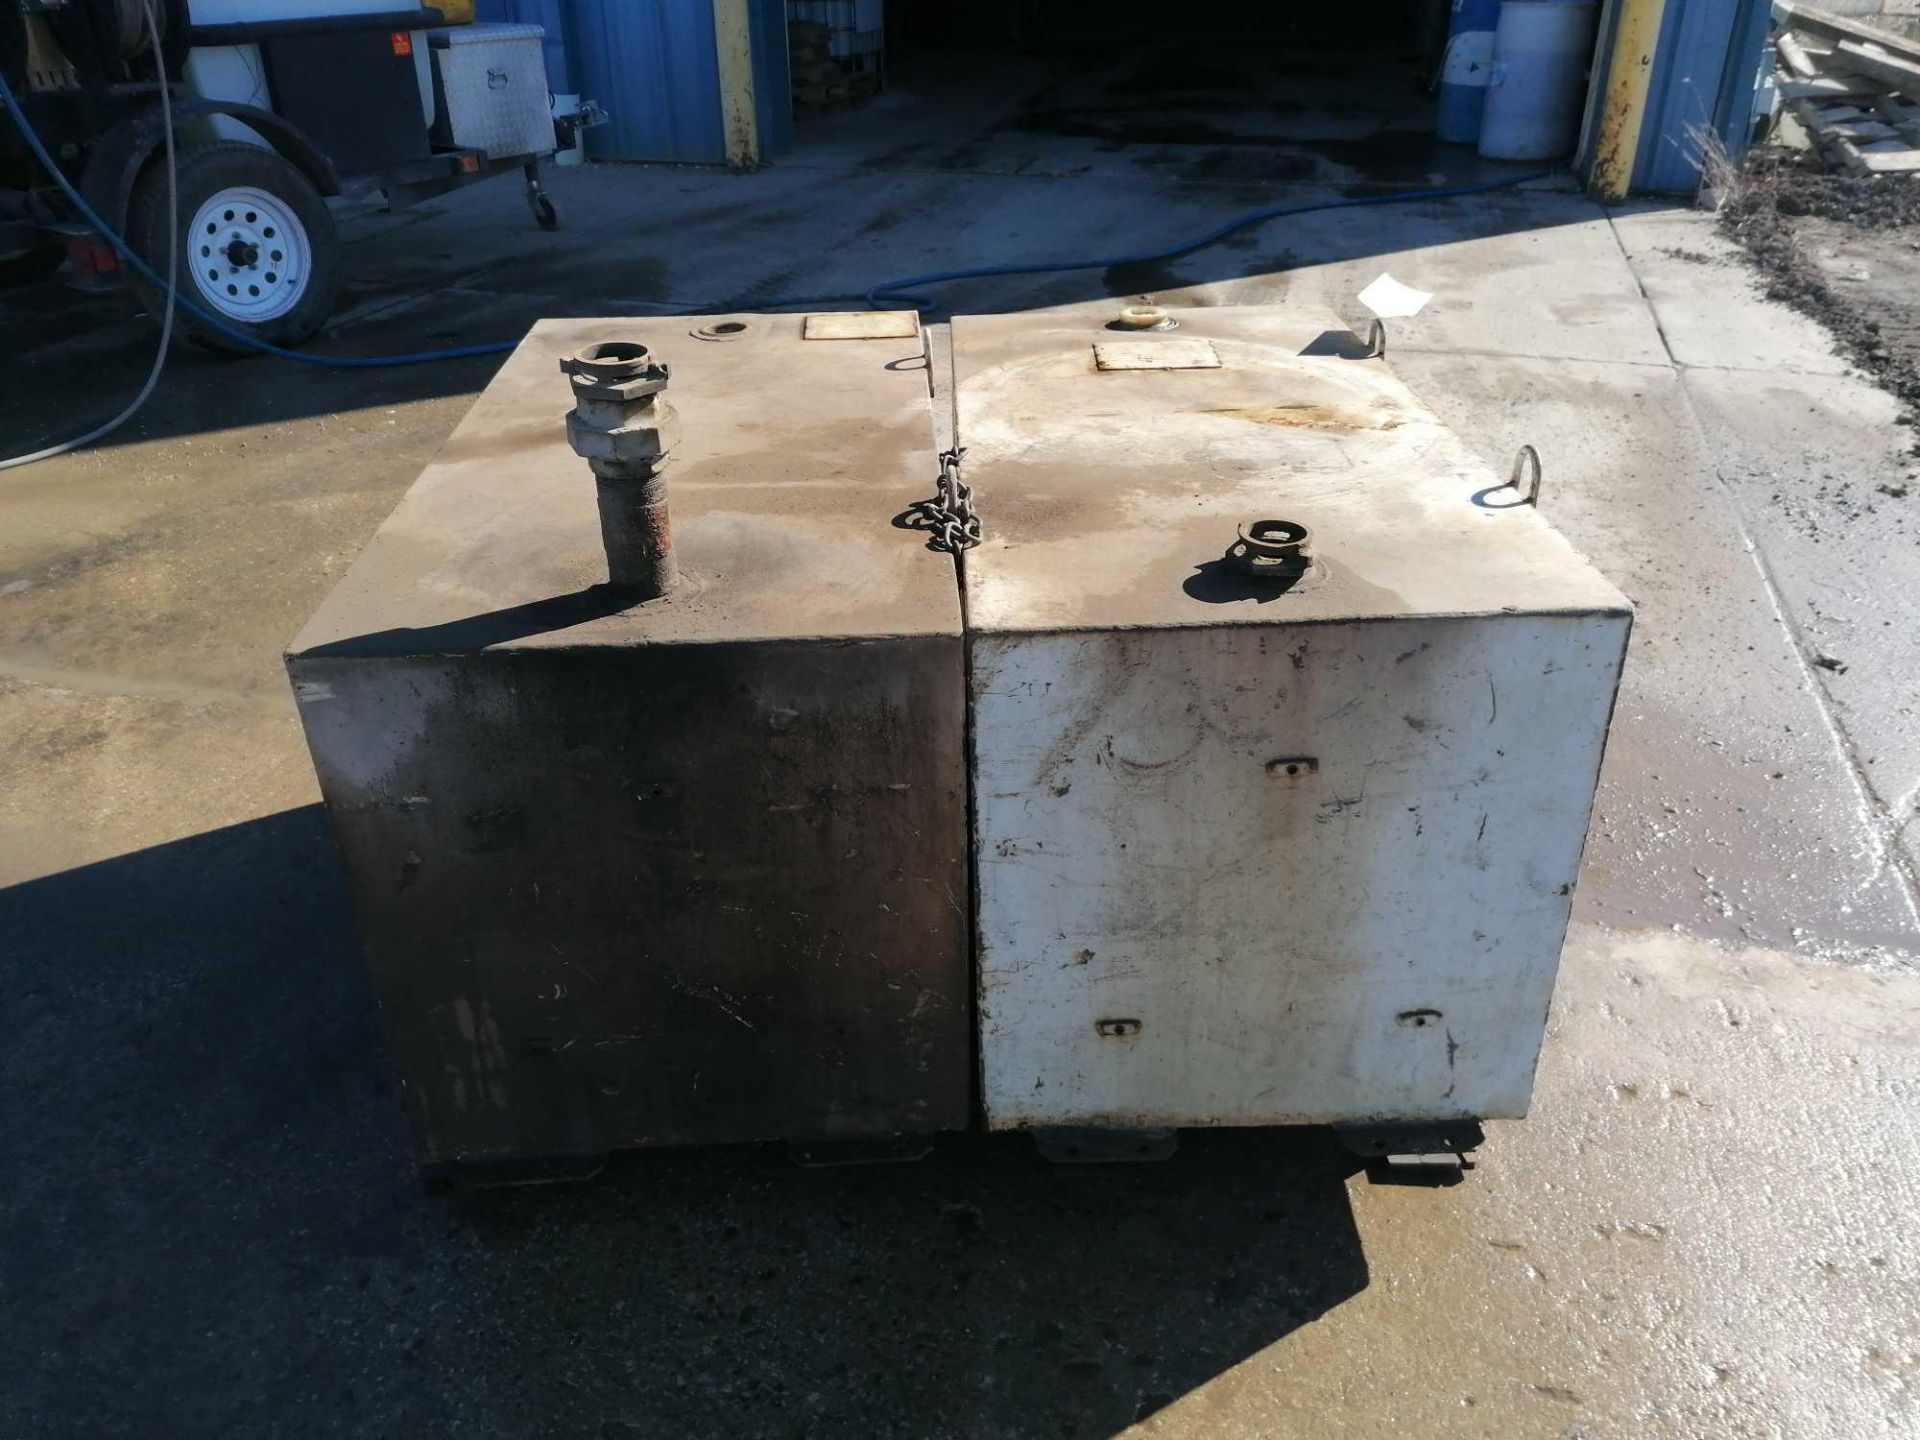 (2) Delta Consolidates 100 GAL Fuel Tanks, Model 484000, Serial #135668 & #096396. Located in